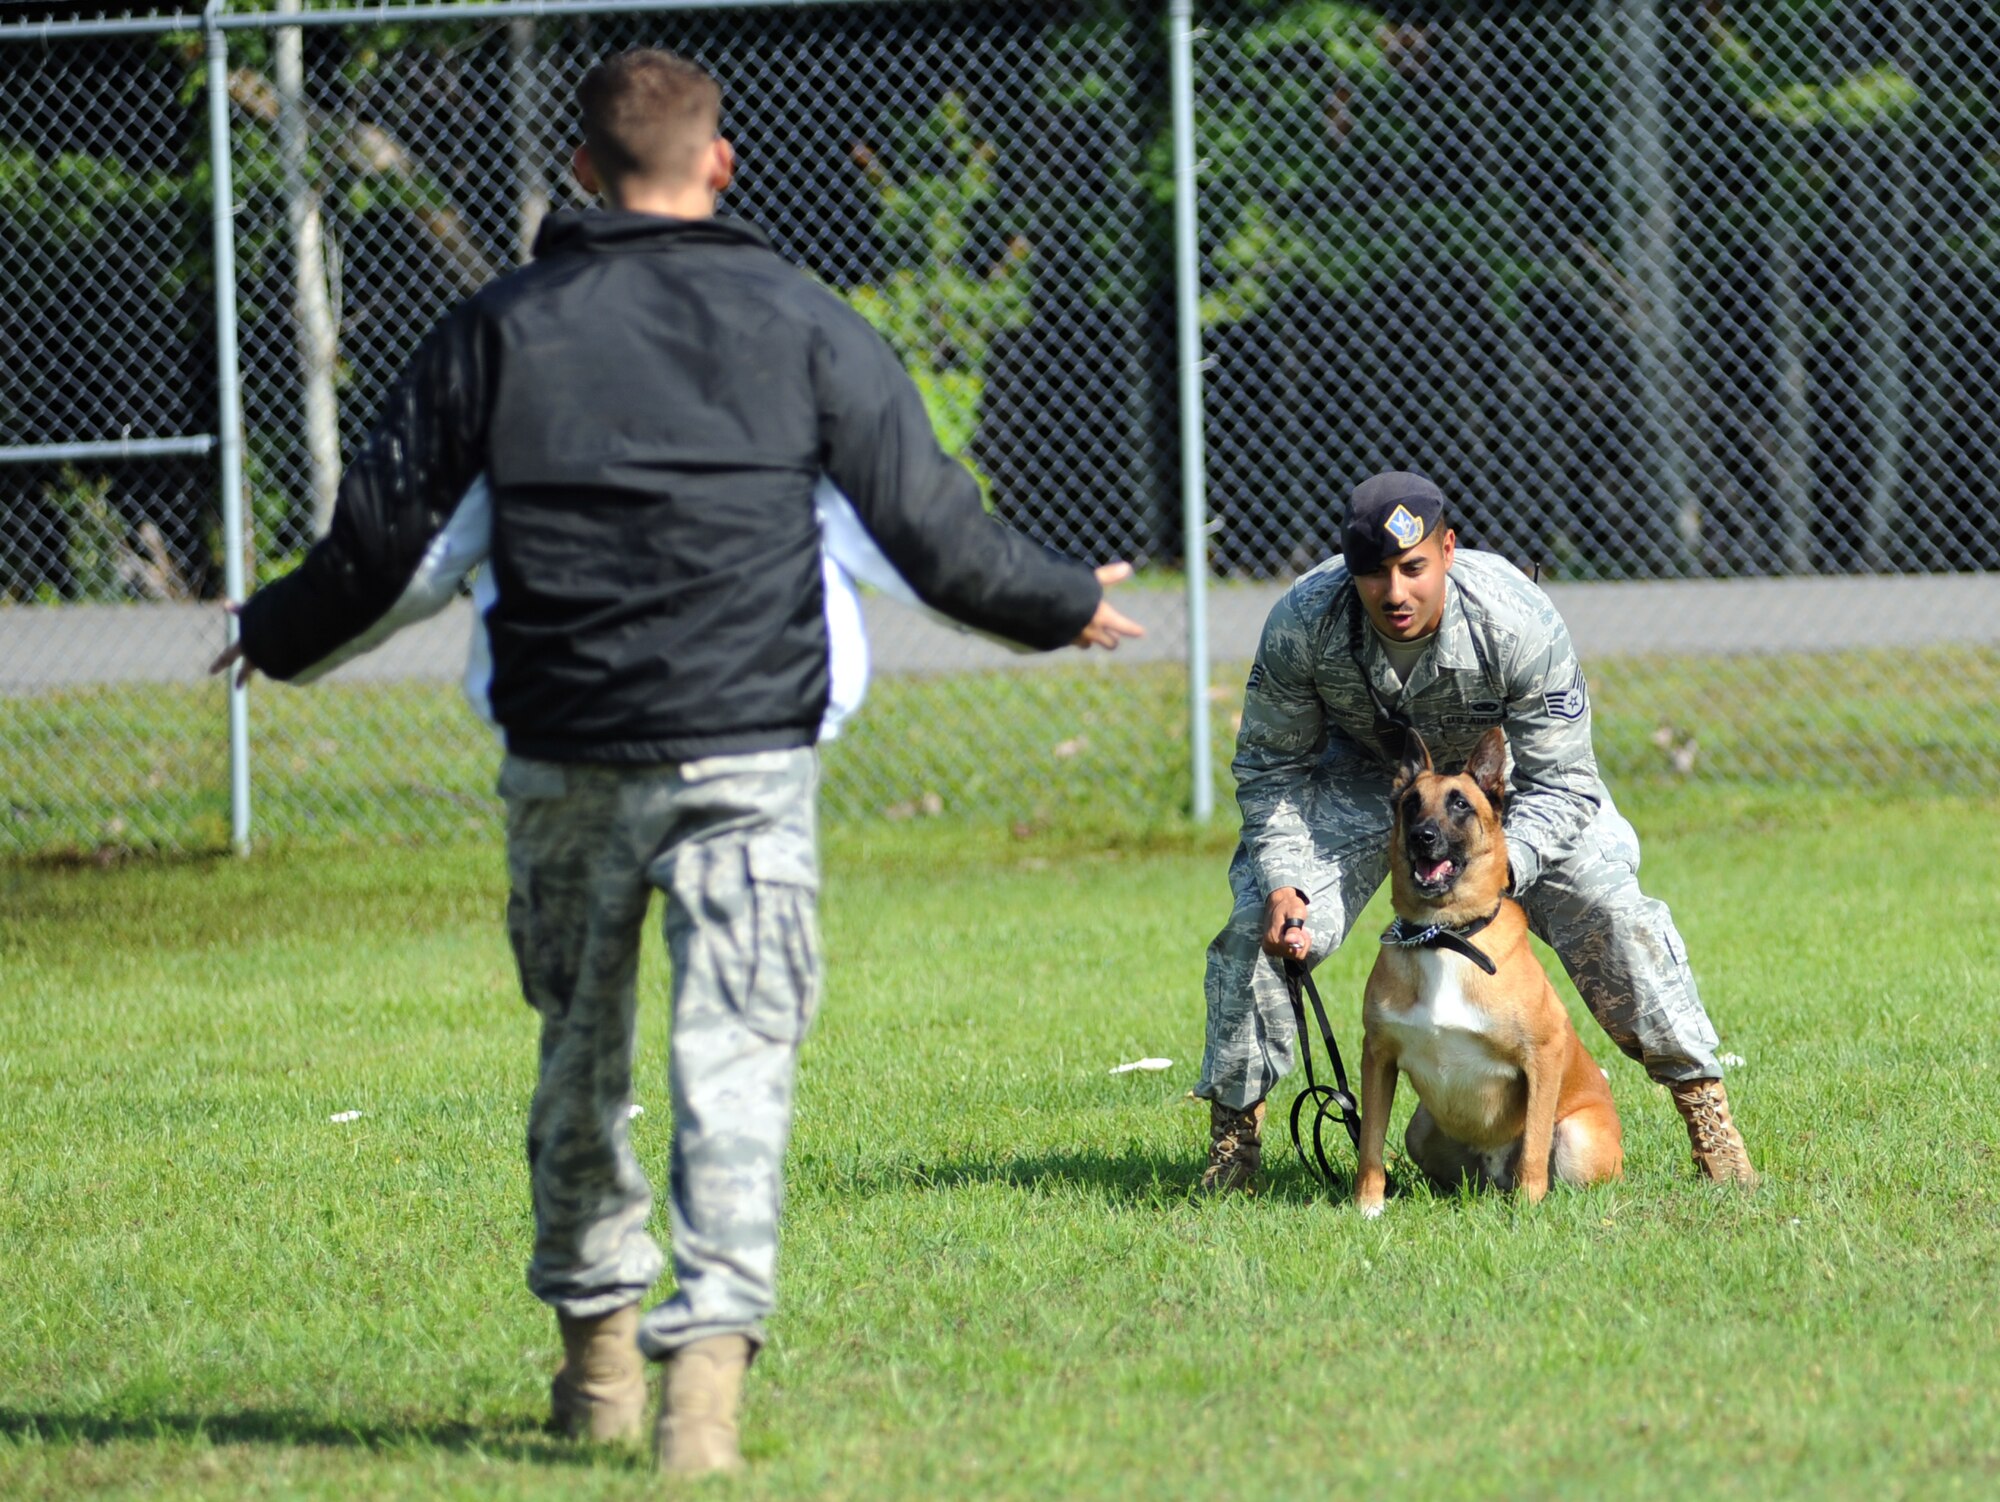 U.S. Air Force Staff Sgt. Fazel Munshi gives his military working dog Arton the command, "watch him", as U.S. Air Force Staff Sgt. Craig Martin plays the role of an uncooperative suspect during a controlled aggression exercise Aug. 20, 2010, on Joint Base Charleston, S.C. MWDs are trained to attack suspects with or without commands from their dog handlers. Sergeant Martin wore a protective jacket to protect himself from the dog's bite as he role-played as a suspect. Sergeants Martin and Munshi are dog handlers with the 628th Security Forces Squadron. (U.S. Air Force photo/Senior Airman Timothy Taylor)